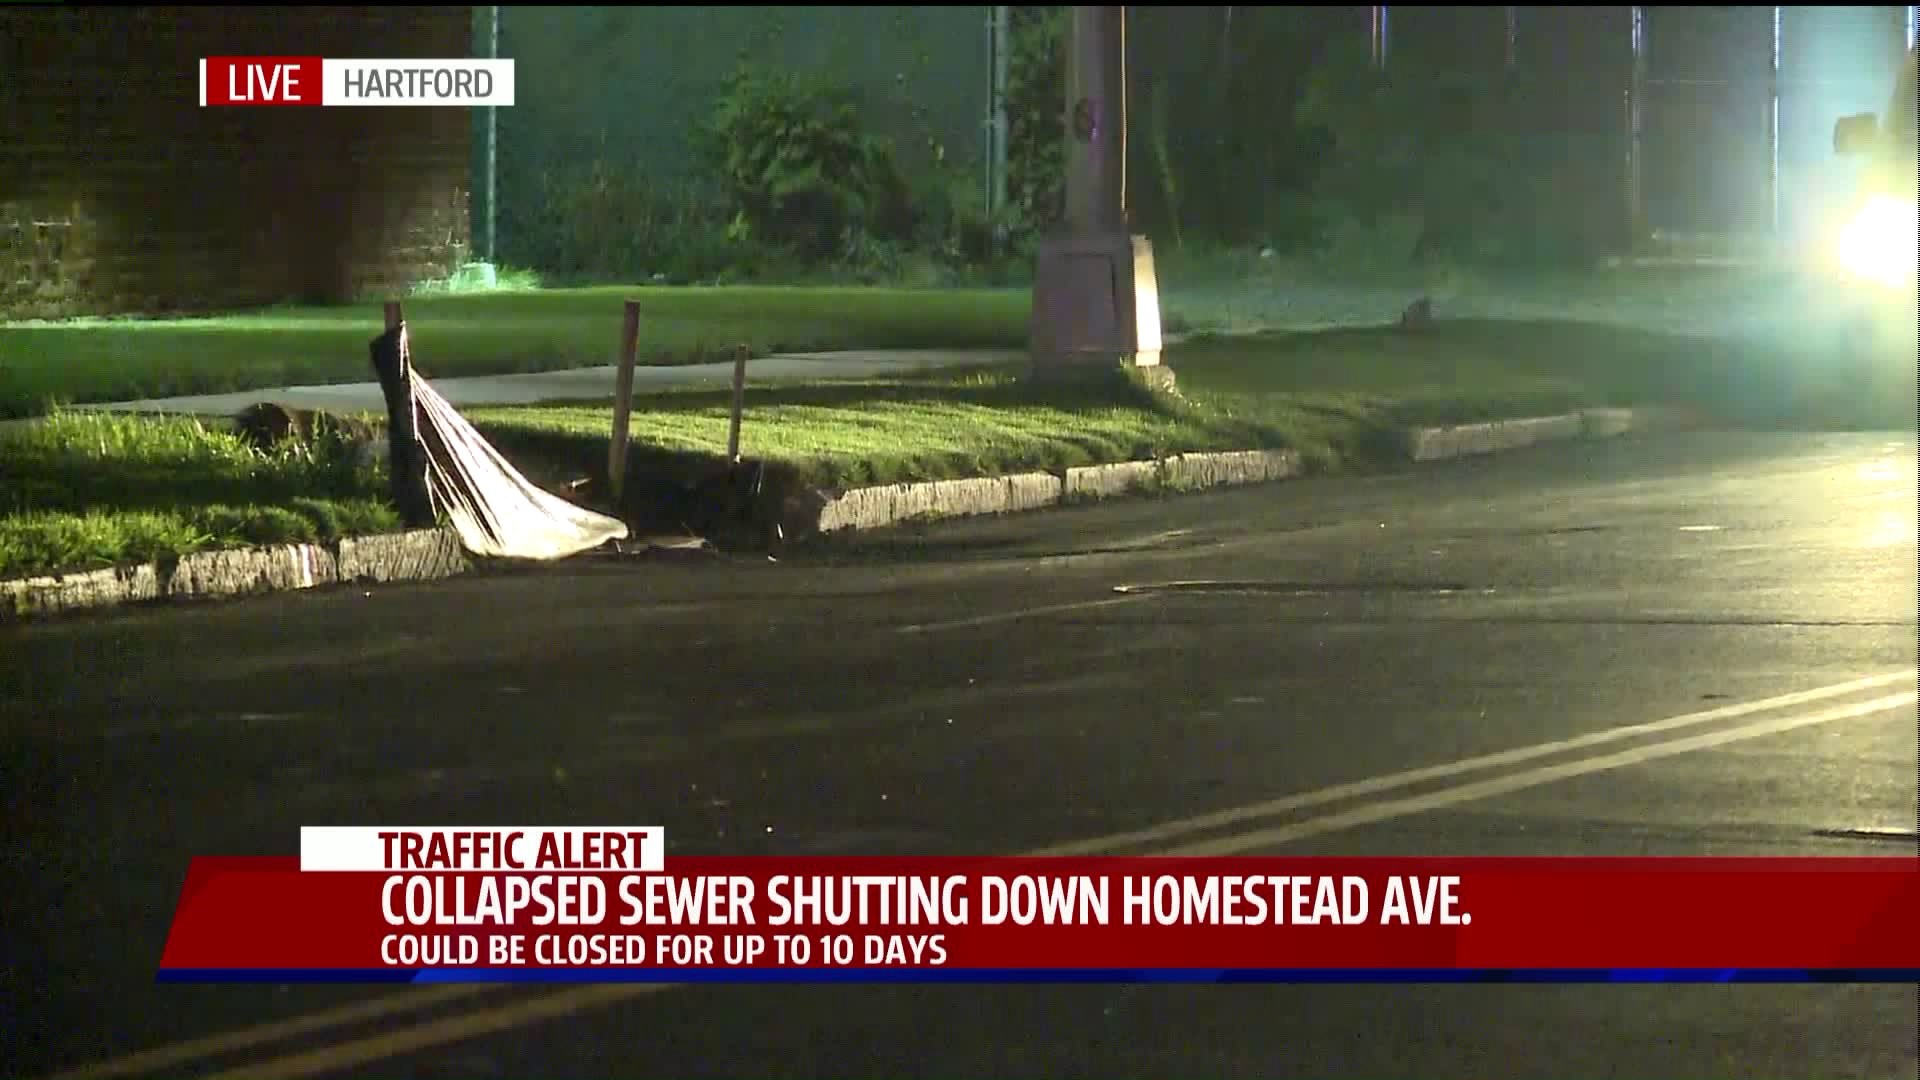 Homestead Ave. closed for 10 days